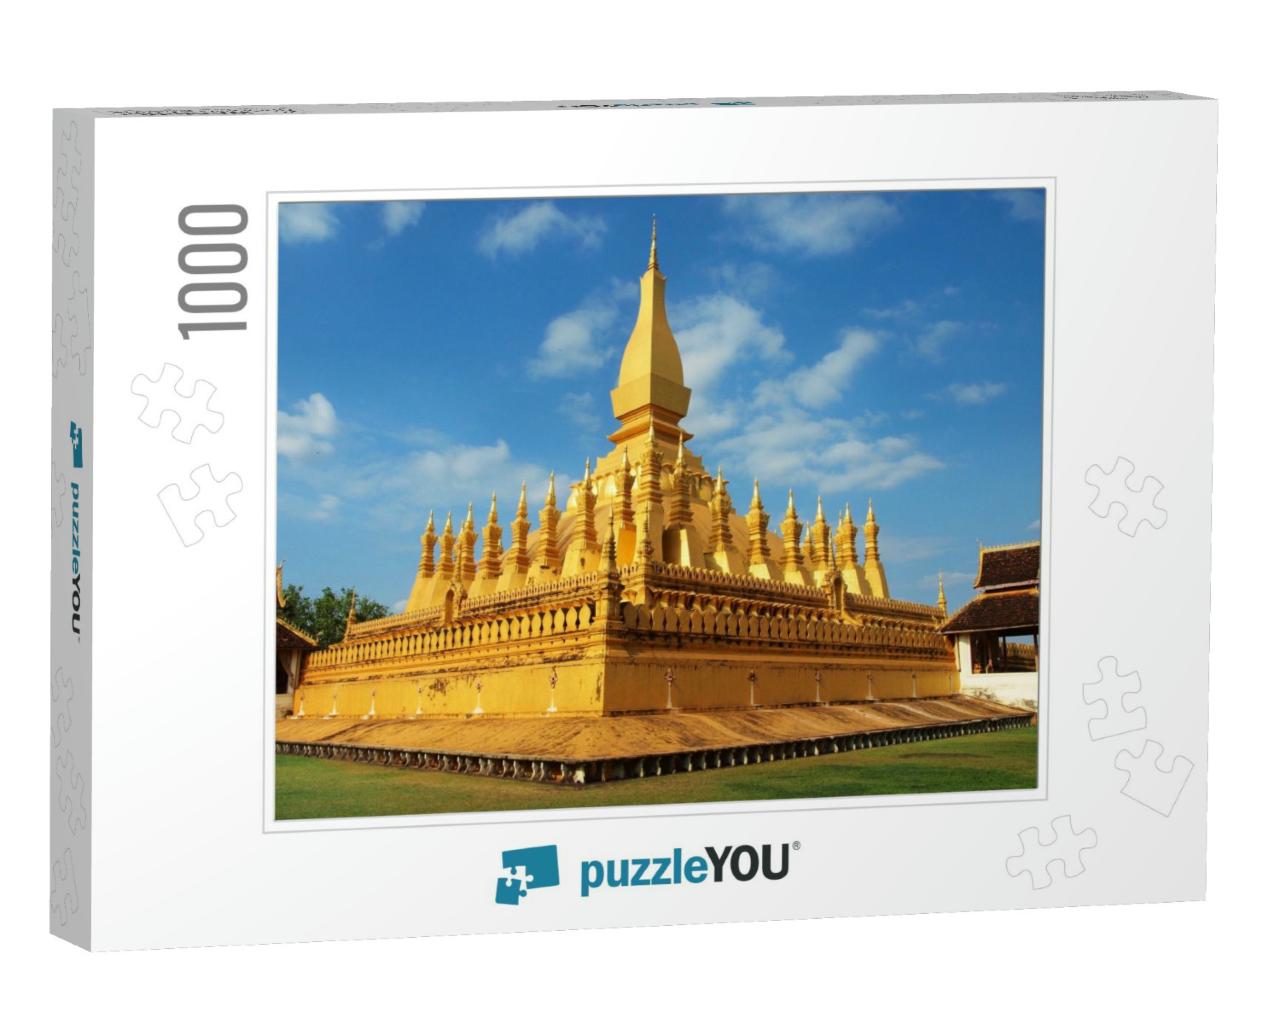 Pha that Luang Temple in Vientiane, Laos... Jigsaw Puzzle with 1000 pieces